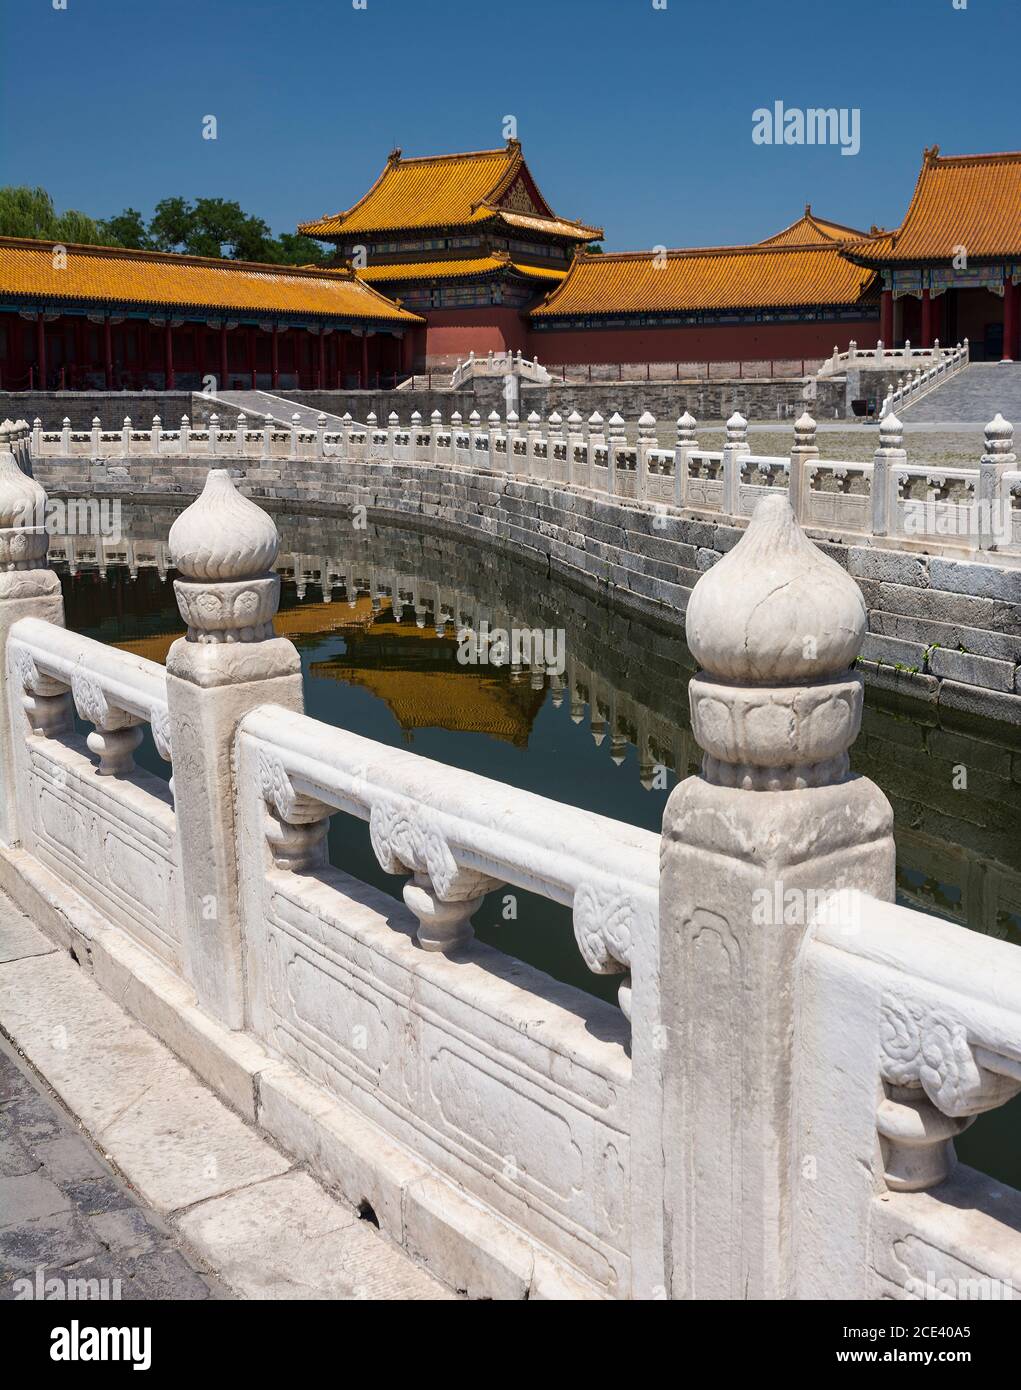 The shining marble balustrades that frame the ponds in the Forbidden City, Beijing, China Stock Photo